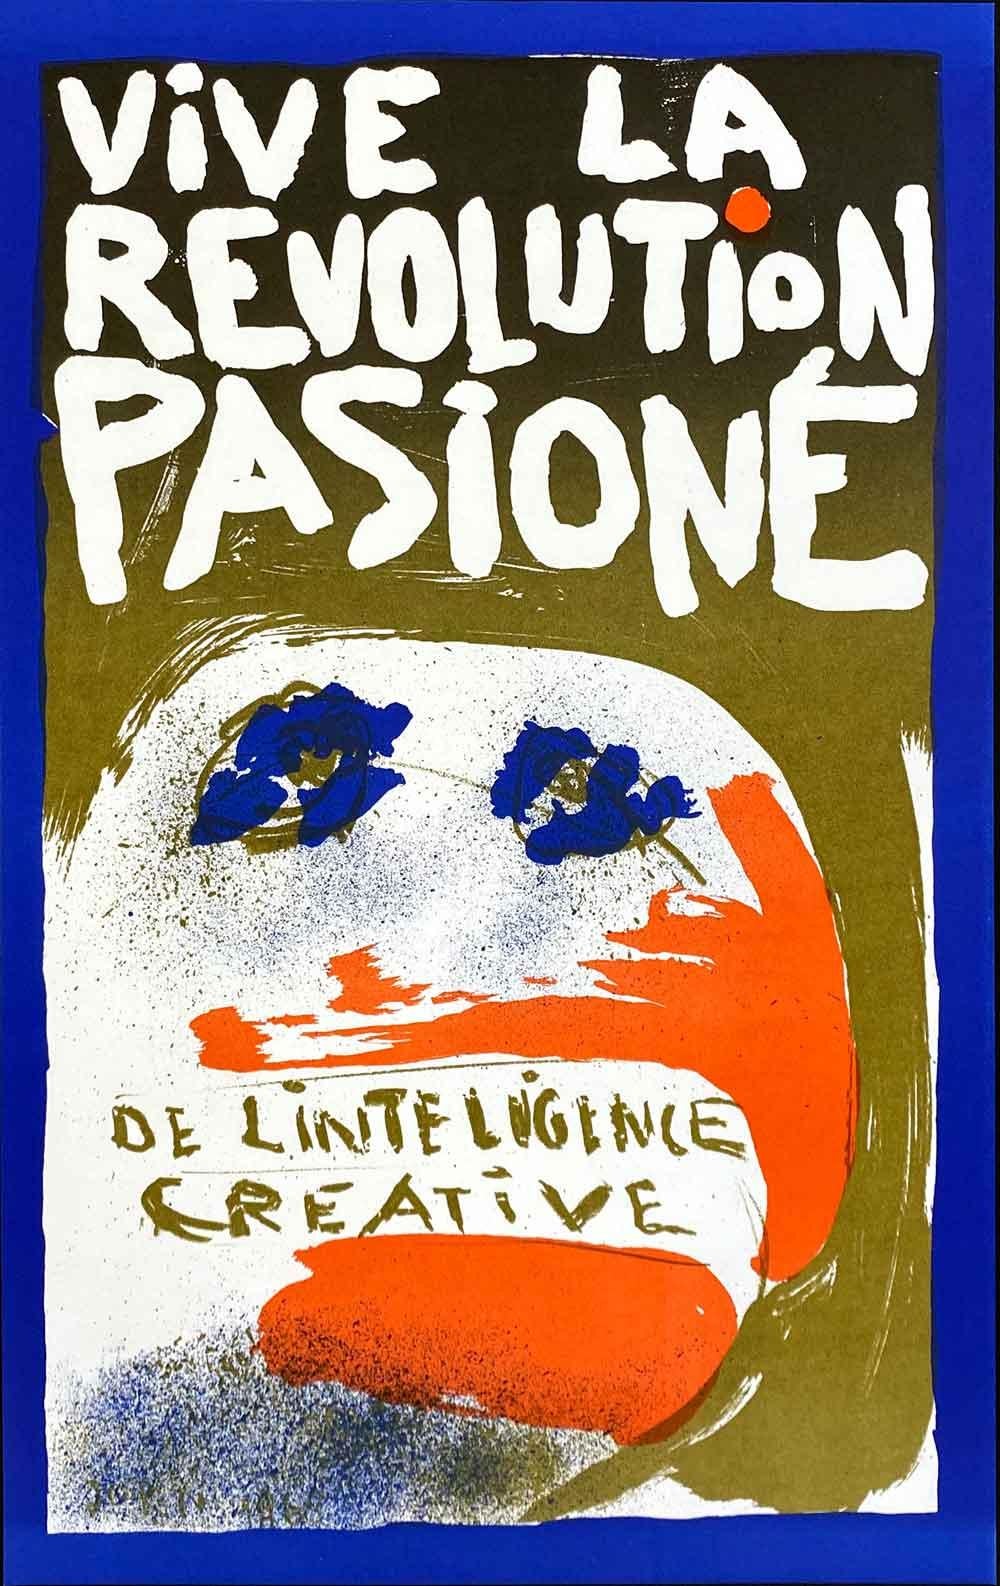 1st edition printed 30 May 1968 in 100 copies.
2nd edition printed 7 June 1968 in 300 copies.
3rd edition printed 28 June 2022 in 400 copies.
Signed in stone.

VIVE LA REVOLUTION PASIONÉ DE LINTELIGENCE CREATIVE – Format: 51 x 32,4 cm

One of four